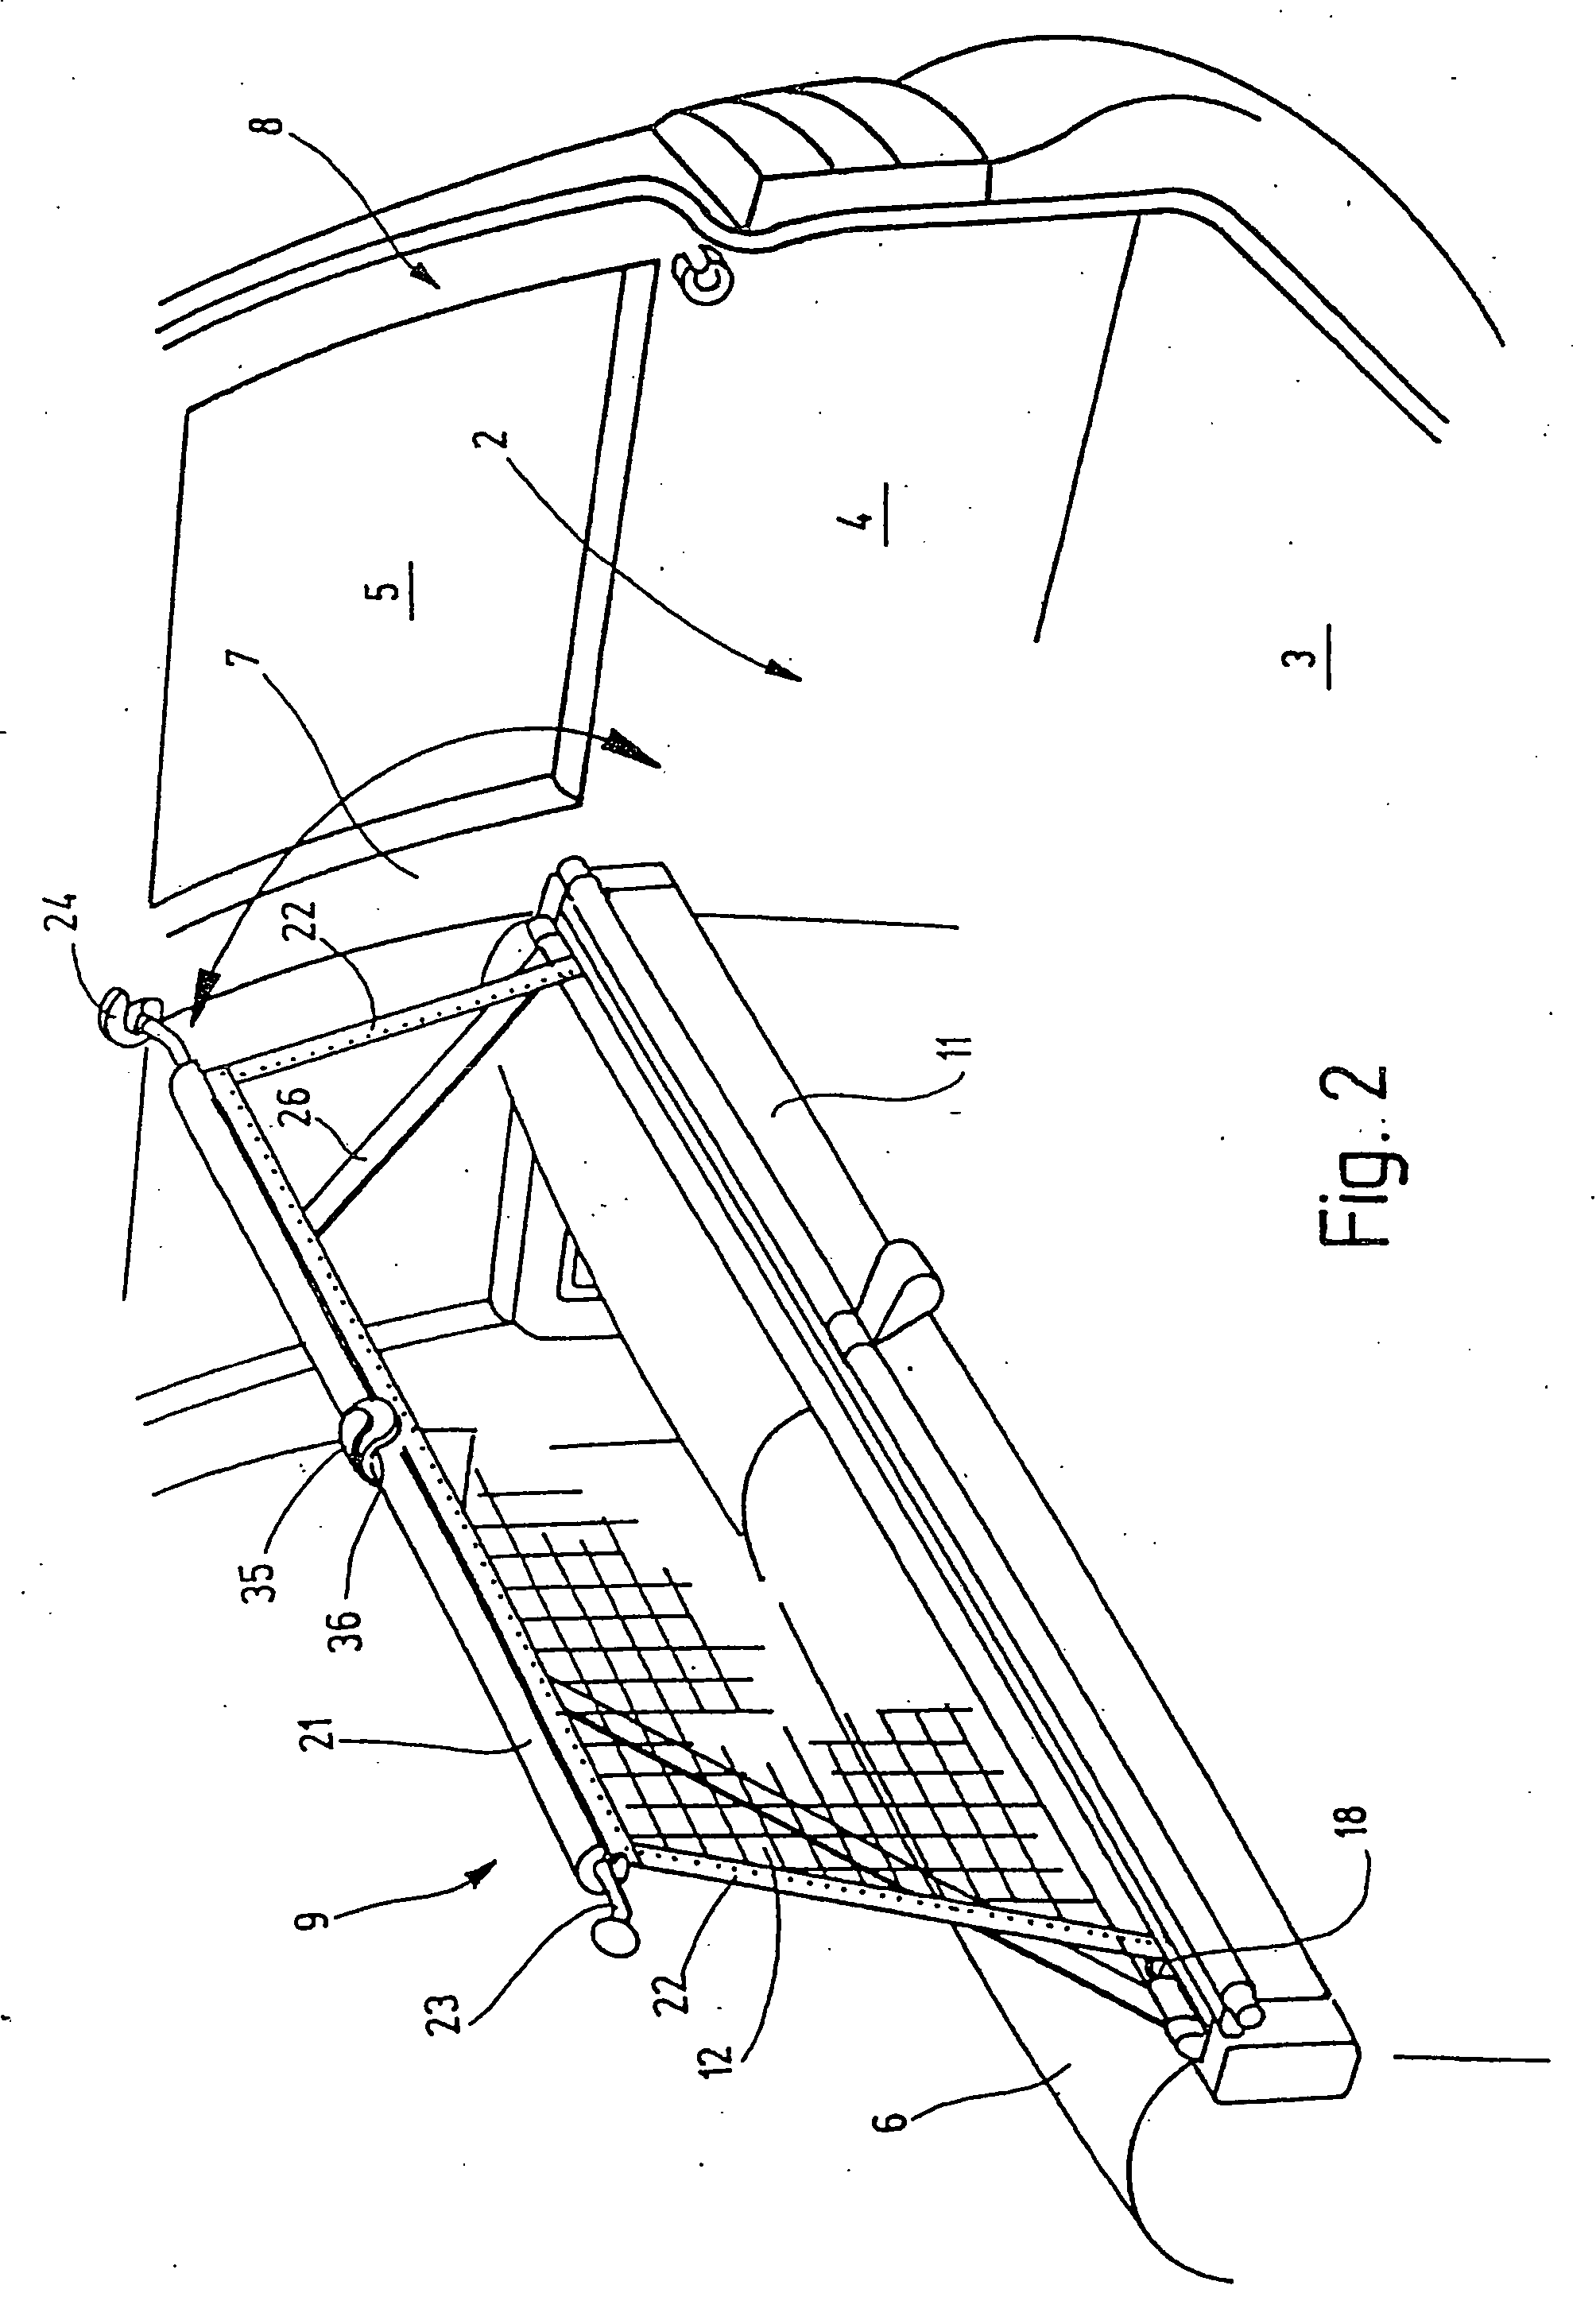 Easy-to-use safety net device